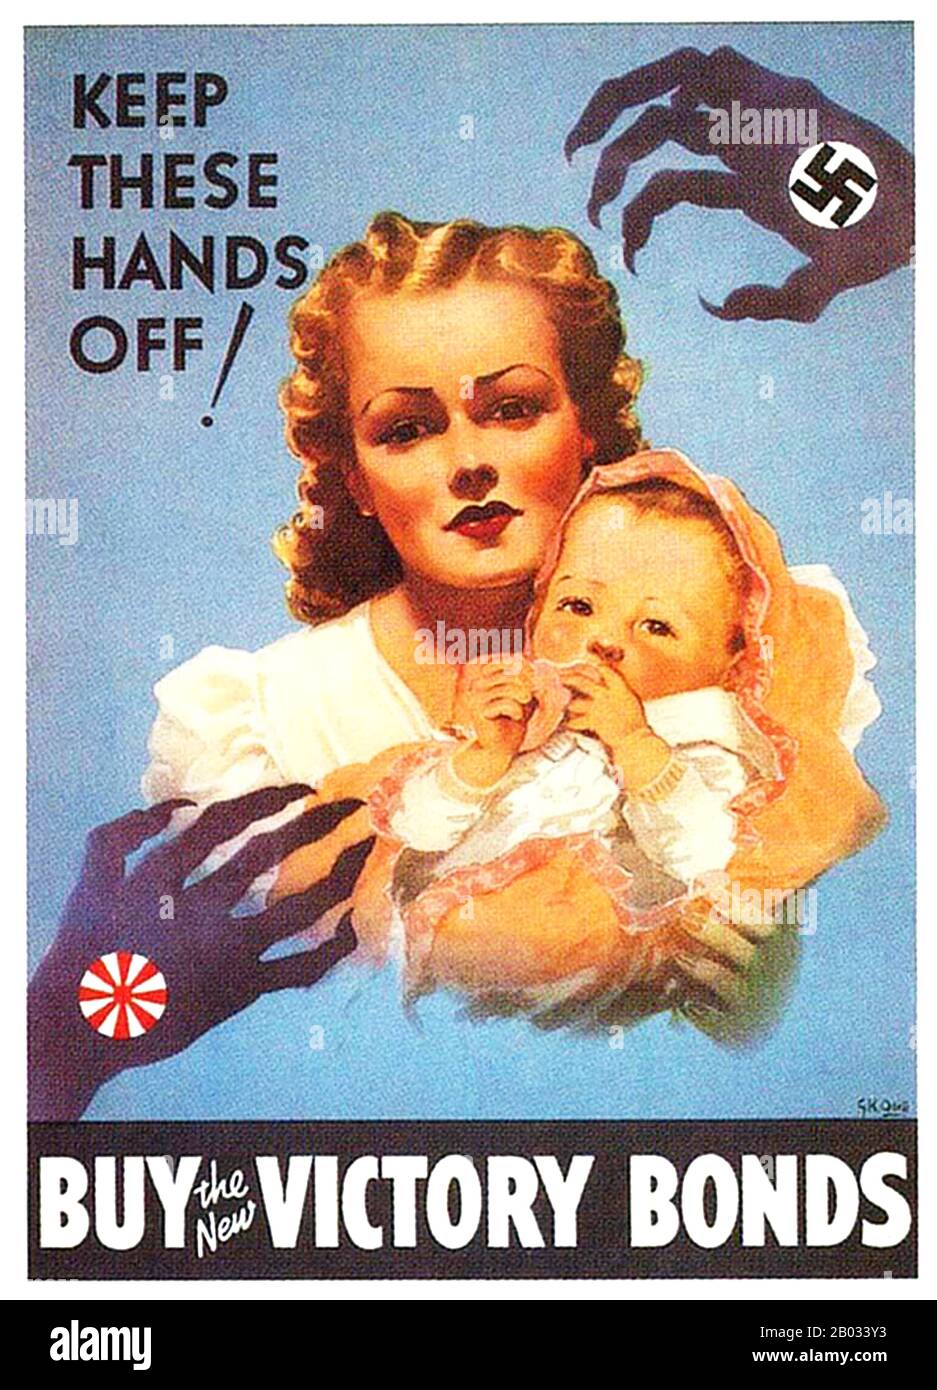 Clawed hands bearing the Nazi Swastika symbol and the Imperial Japanese Rising Sun menace an American woman and child. Stock Photo